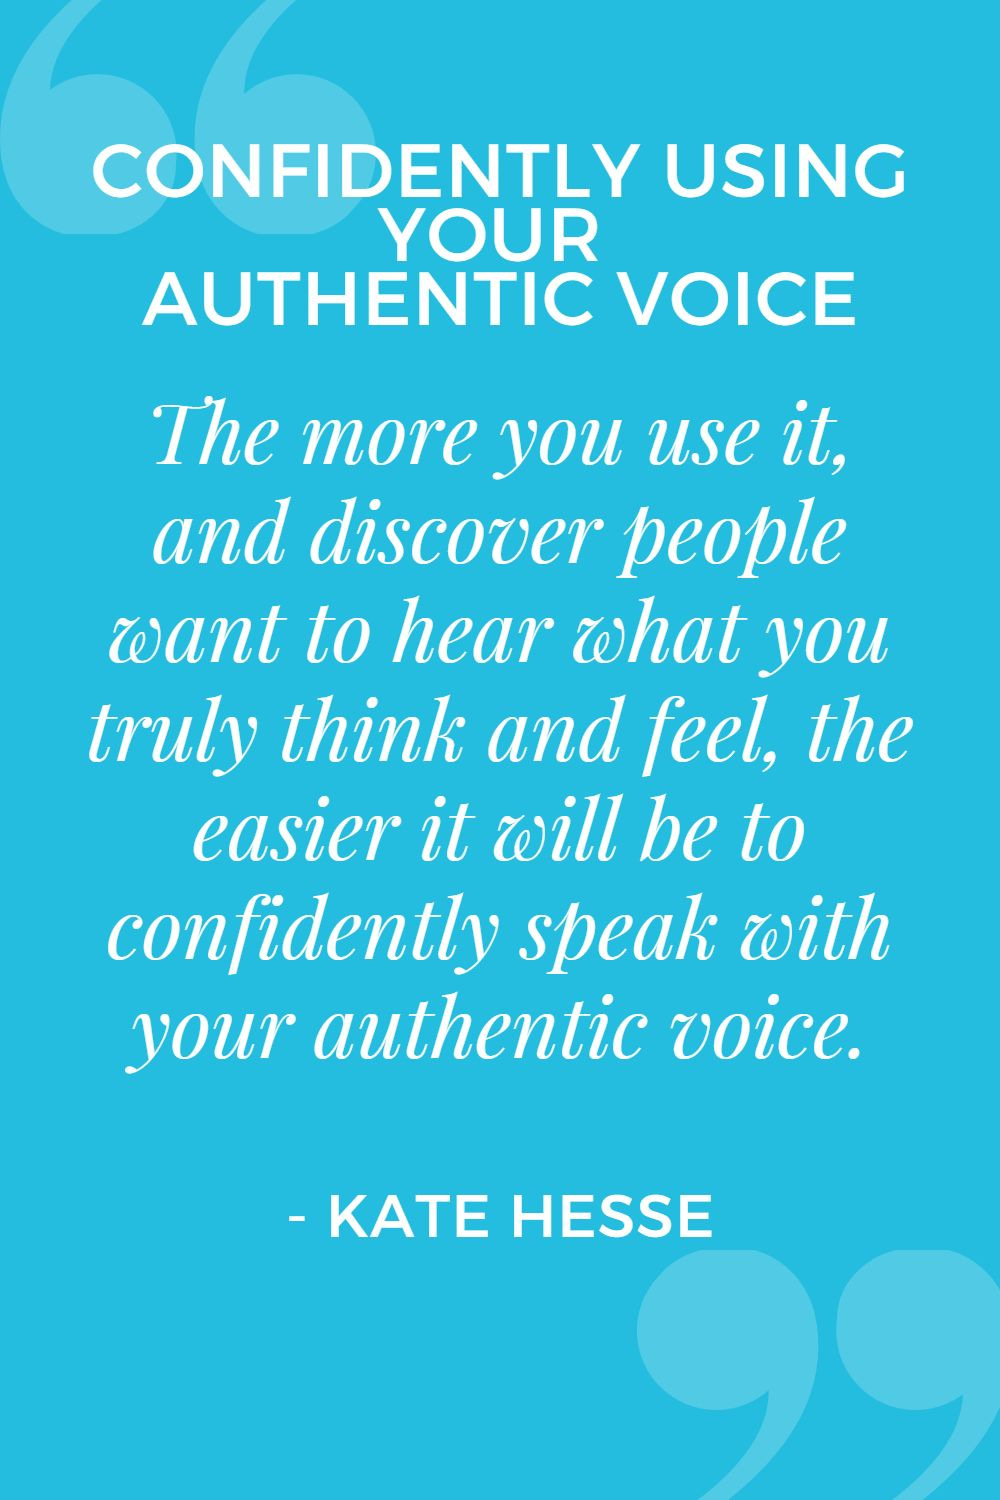 The more you use it, and discover people want to hear what you truly think and feel, the easier it will be to confidently speak with your authentic voice.